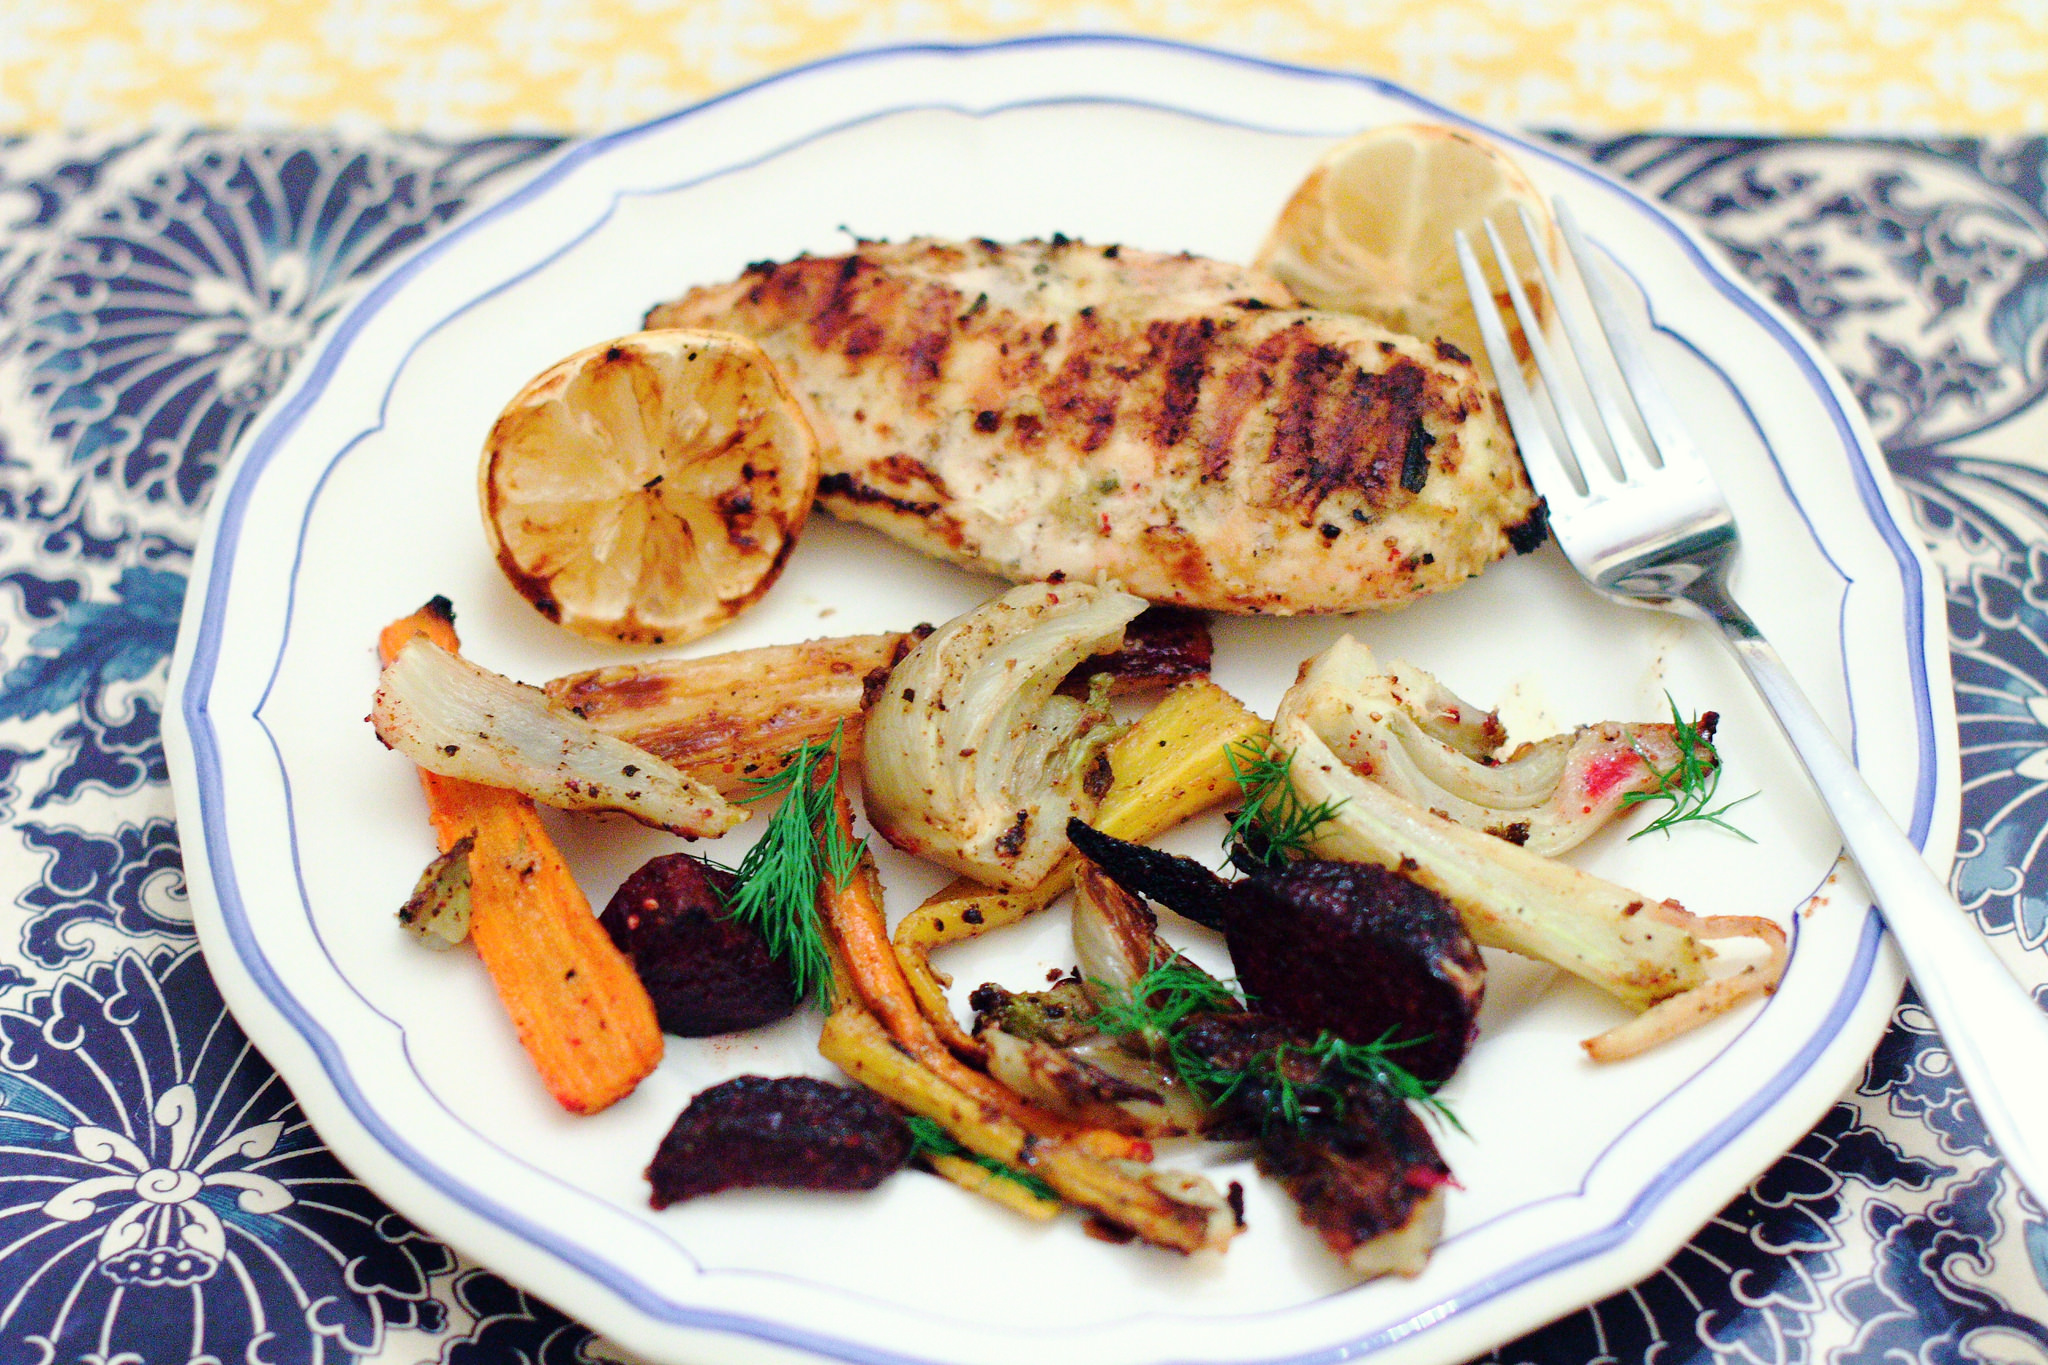 Lemon Chicken and Caramelized Vegetables with Dijon Butter